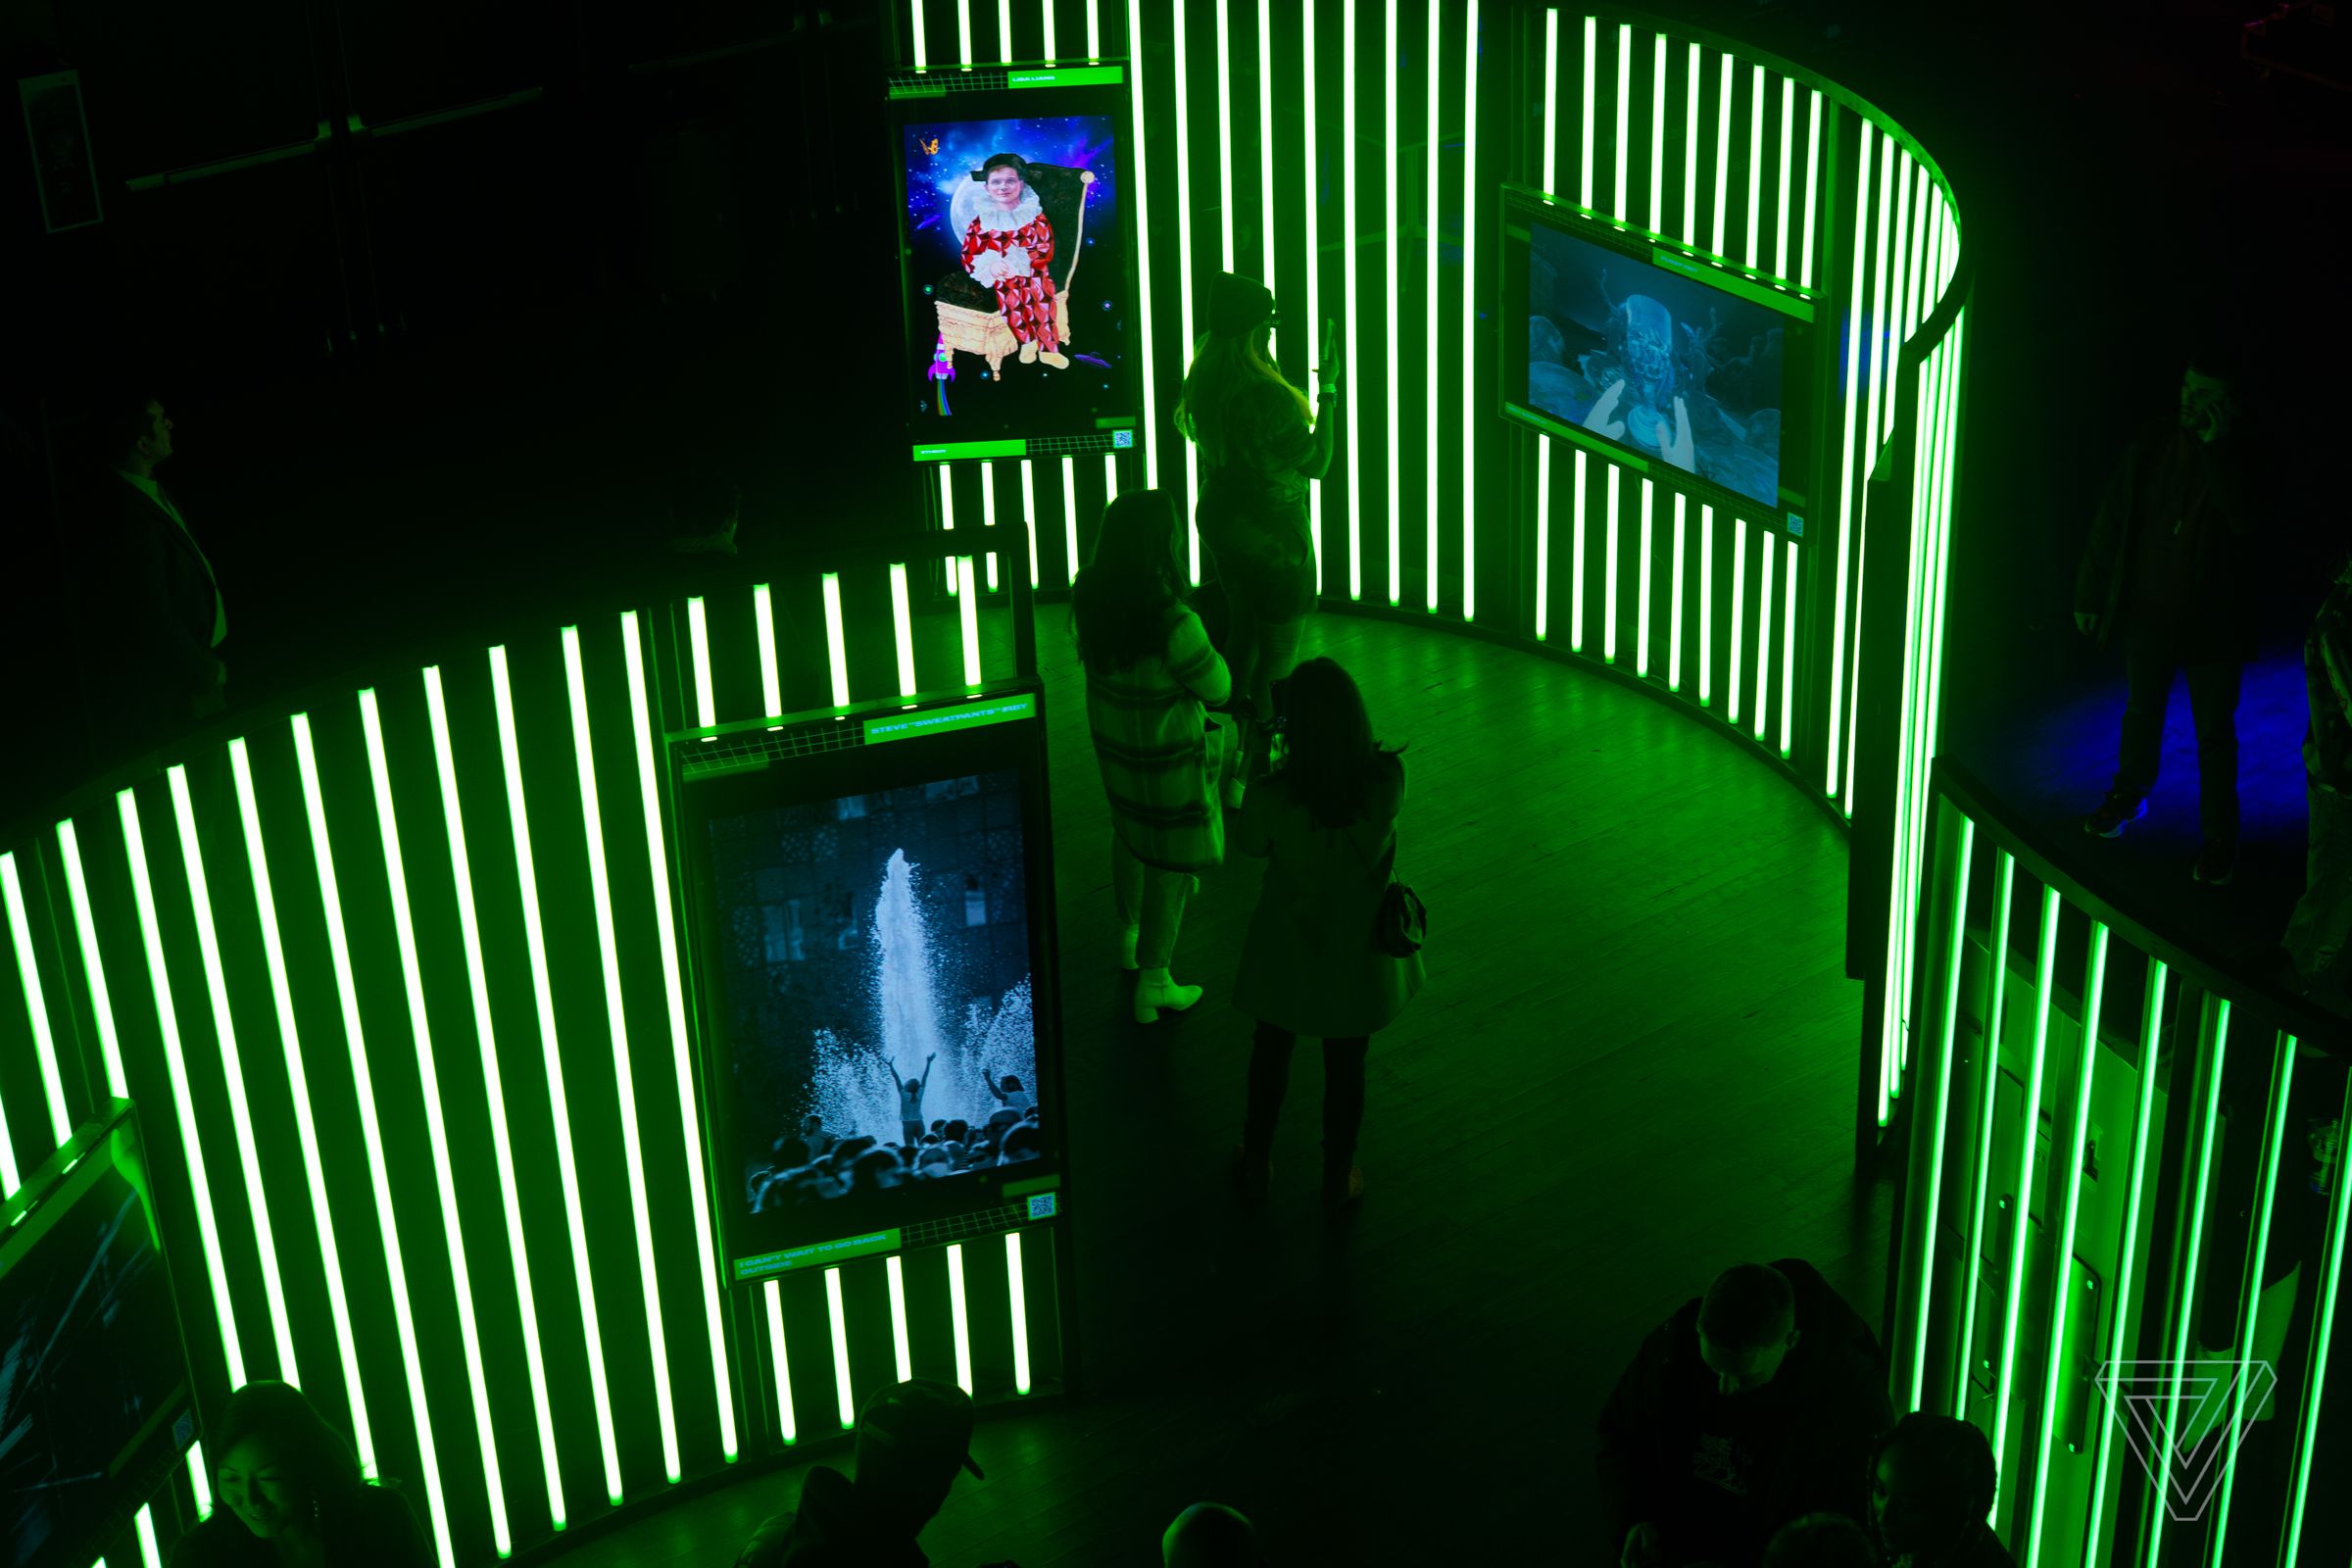 At the center of the Dreamverse gallery was a series of TVs mounted on color-changing tubes of light.